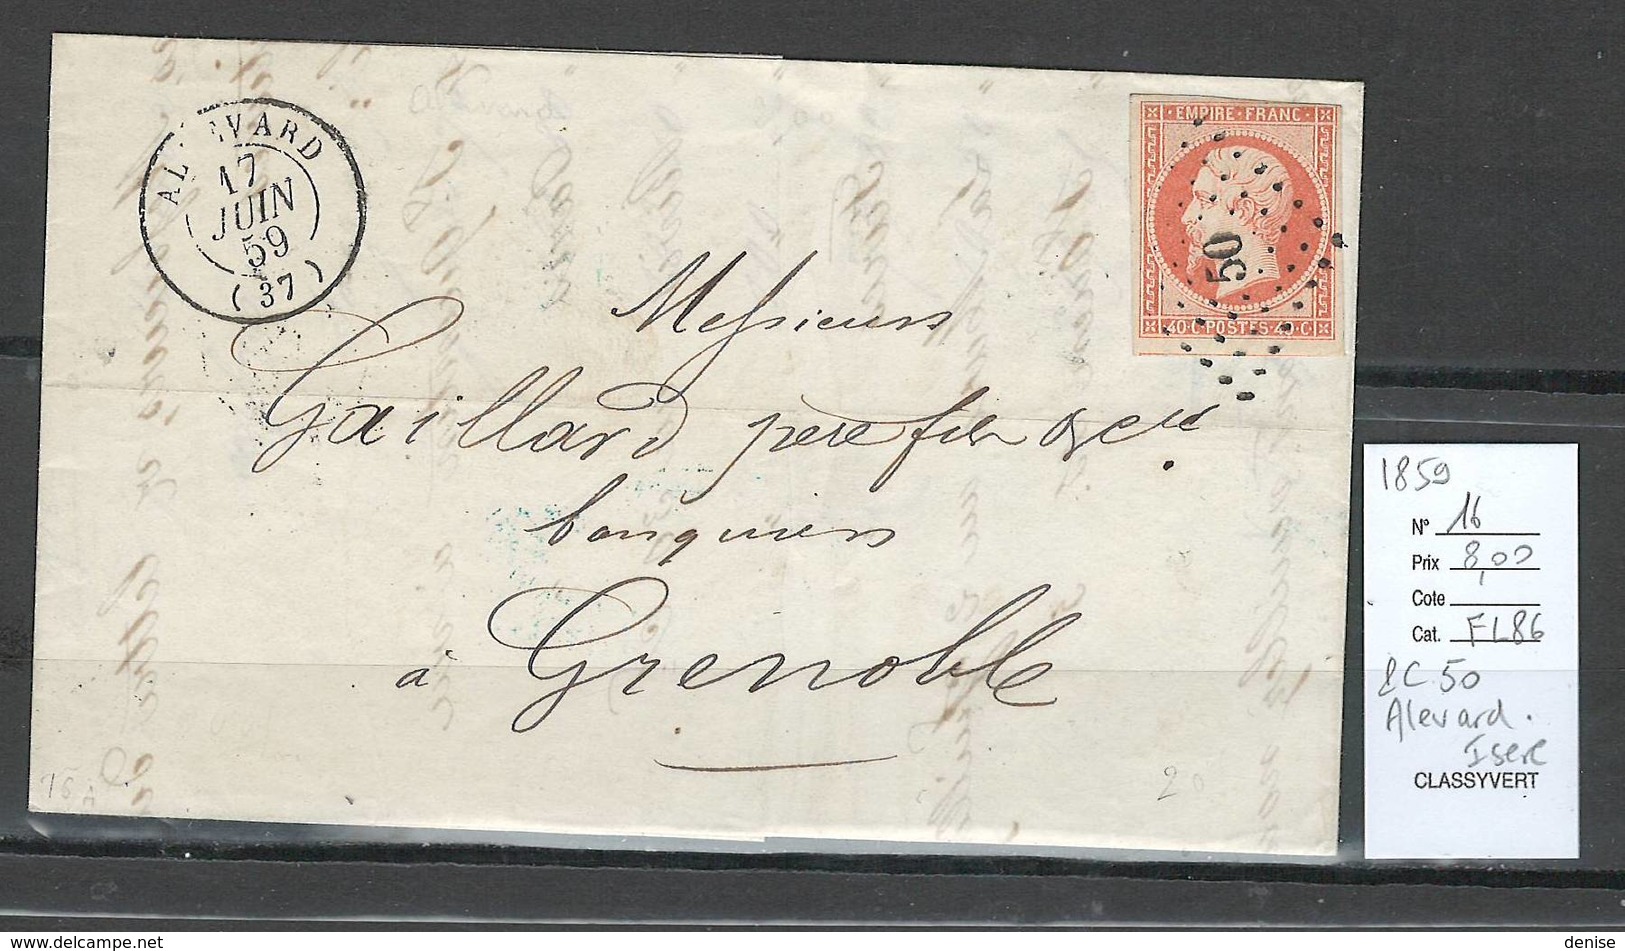 France - Lettre - Yvert 18 - PC 50 Alevard - Isere 1859 - 1849-1876: Classic Period